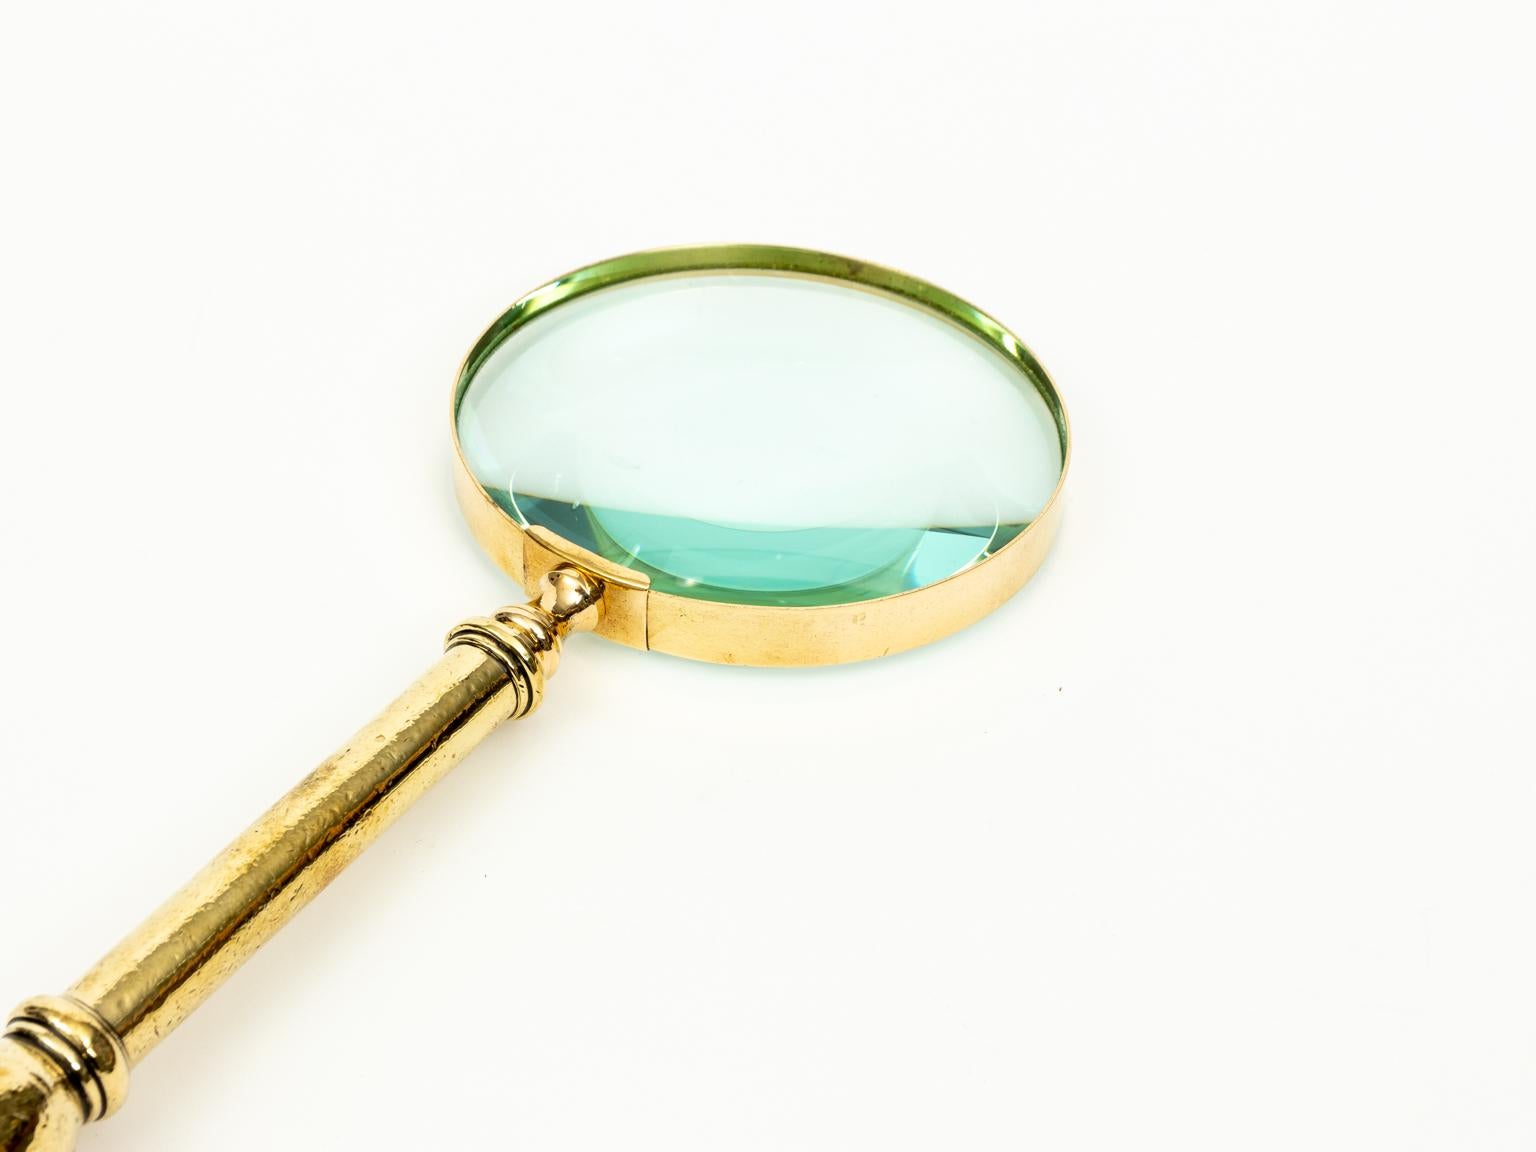 English brass magnifying glass in the Victorian style with urn shaped finial on the handle, circa 1890s. Made in England. Please note of wear consistent with age.